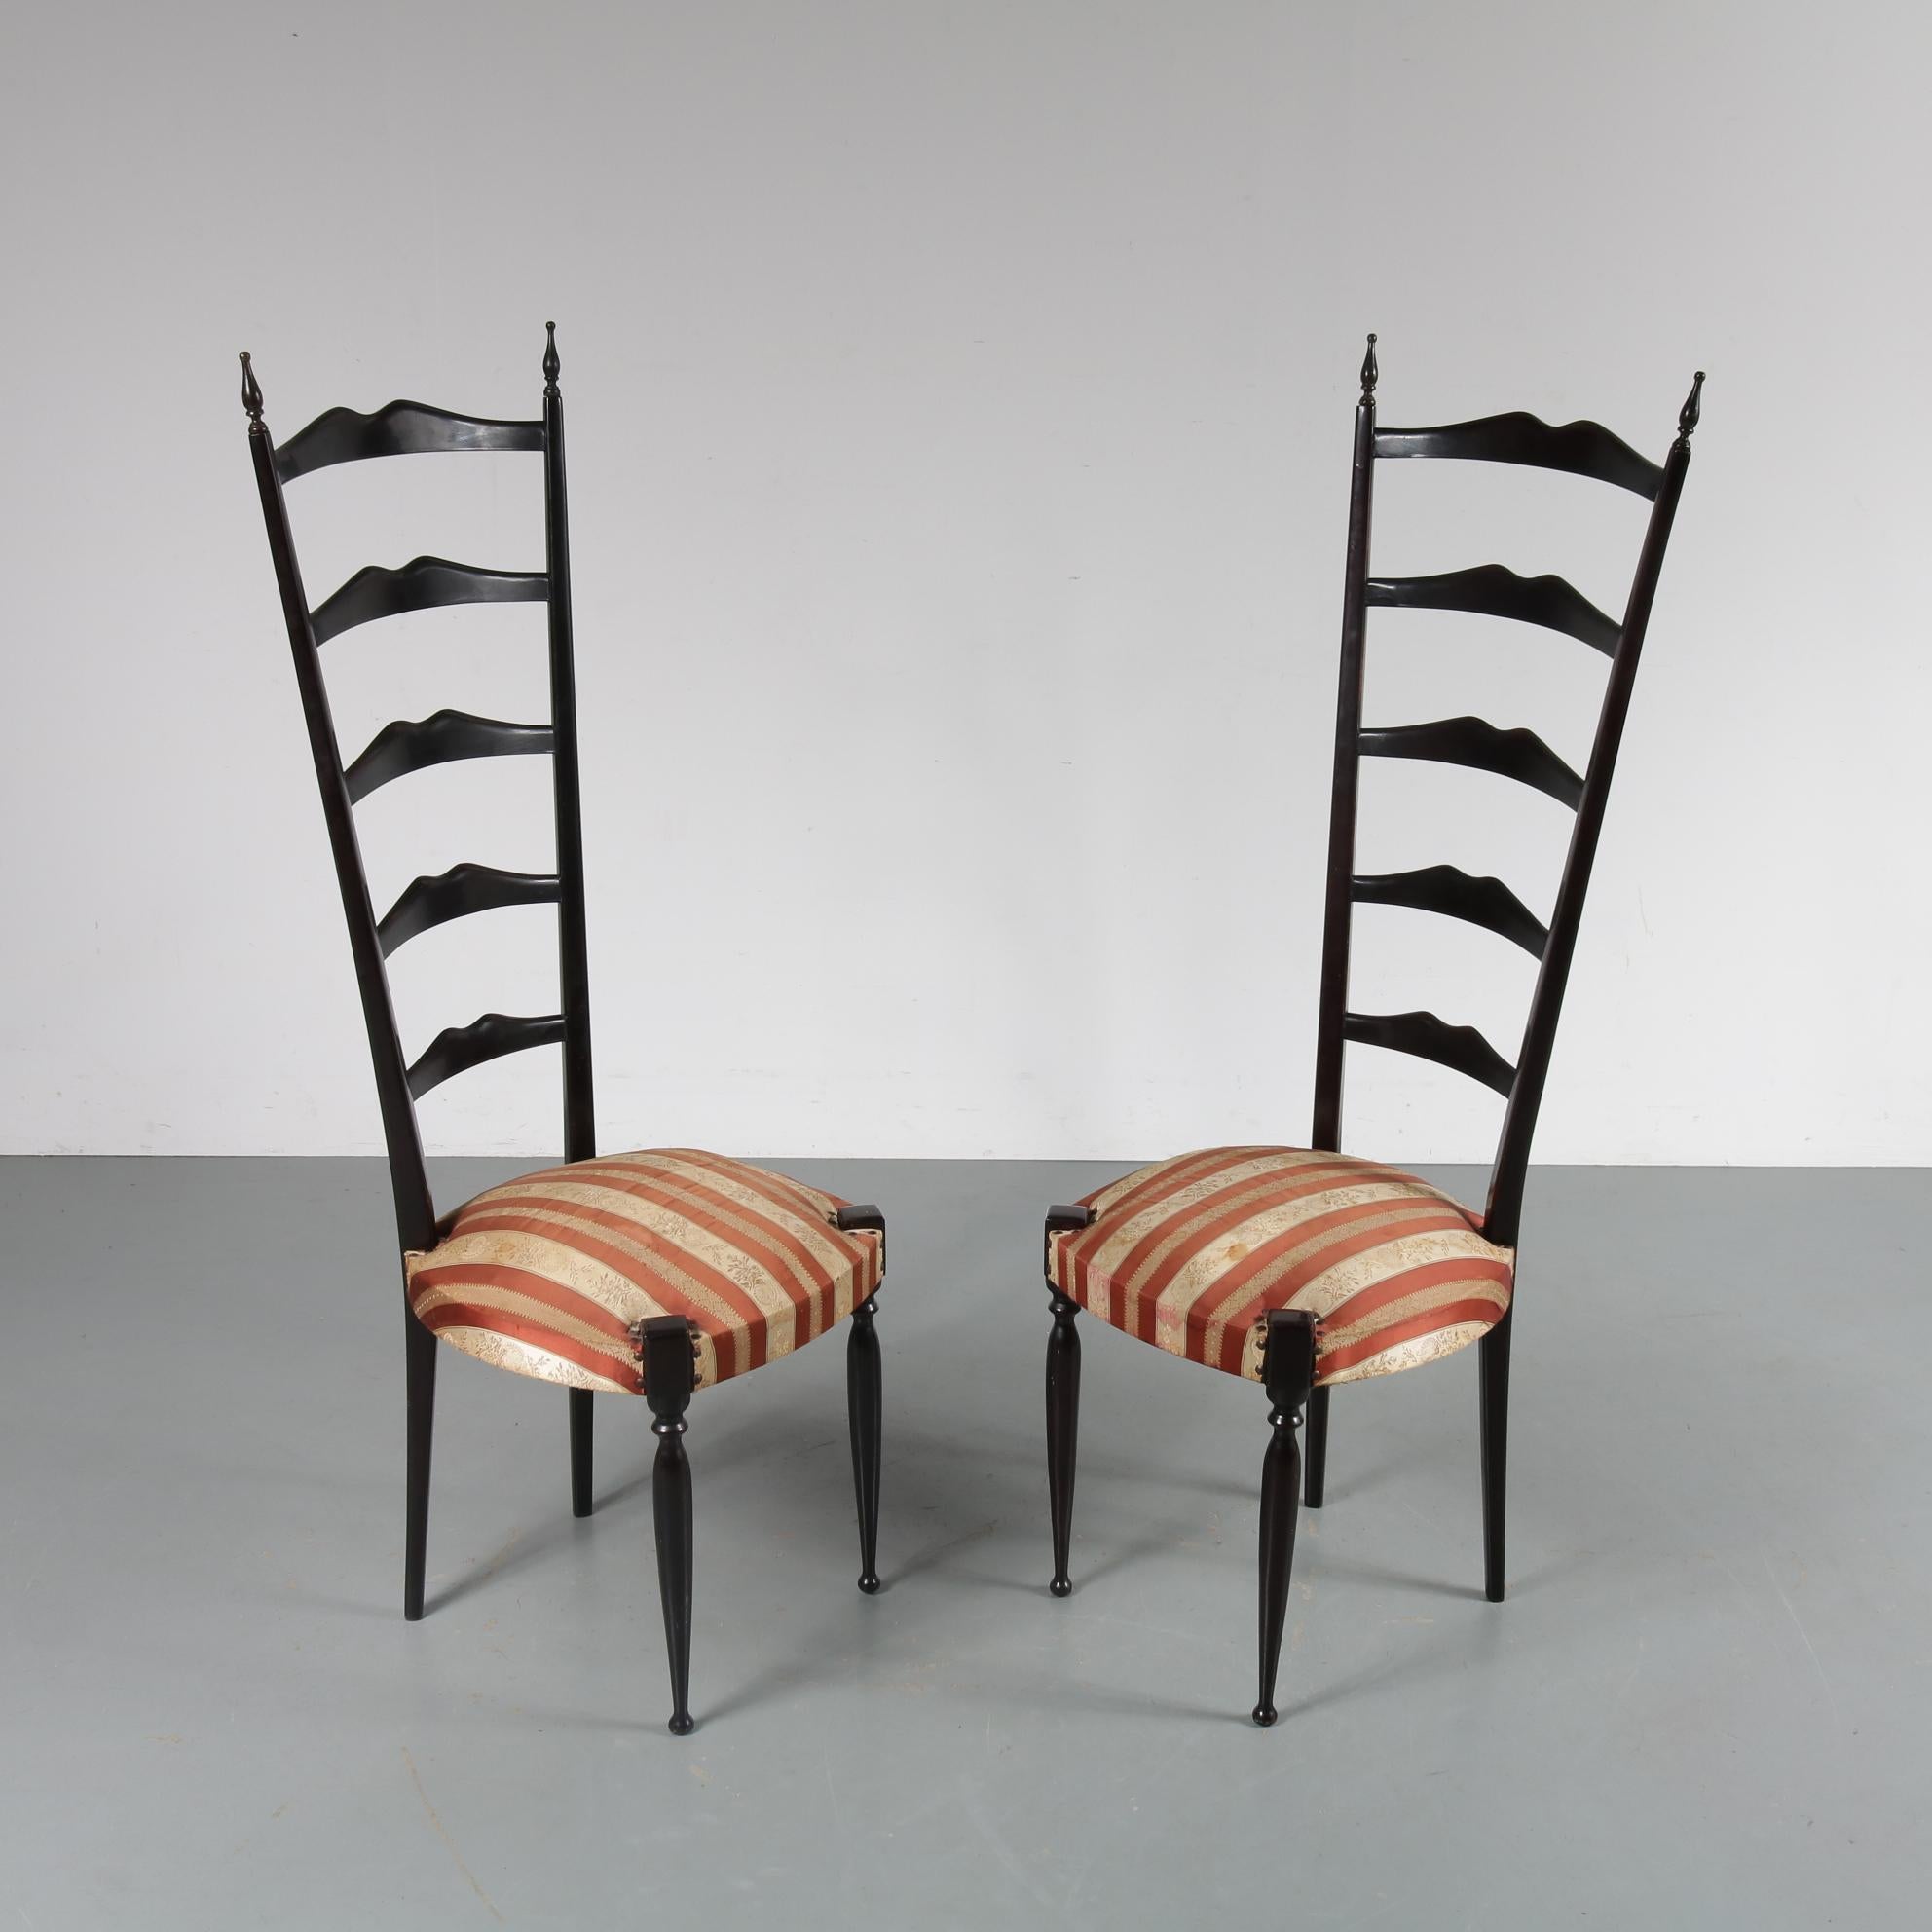 A rare pair of highback side chairs designed by Paulo Buffa and manufactured in Italy, circa 1950.

These beautiful chairs have a wonderful elegant appearance, making them iconic pieces of Italian design. They are made of high quality dark